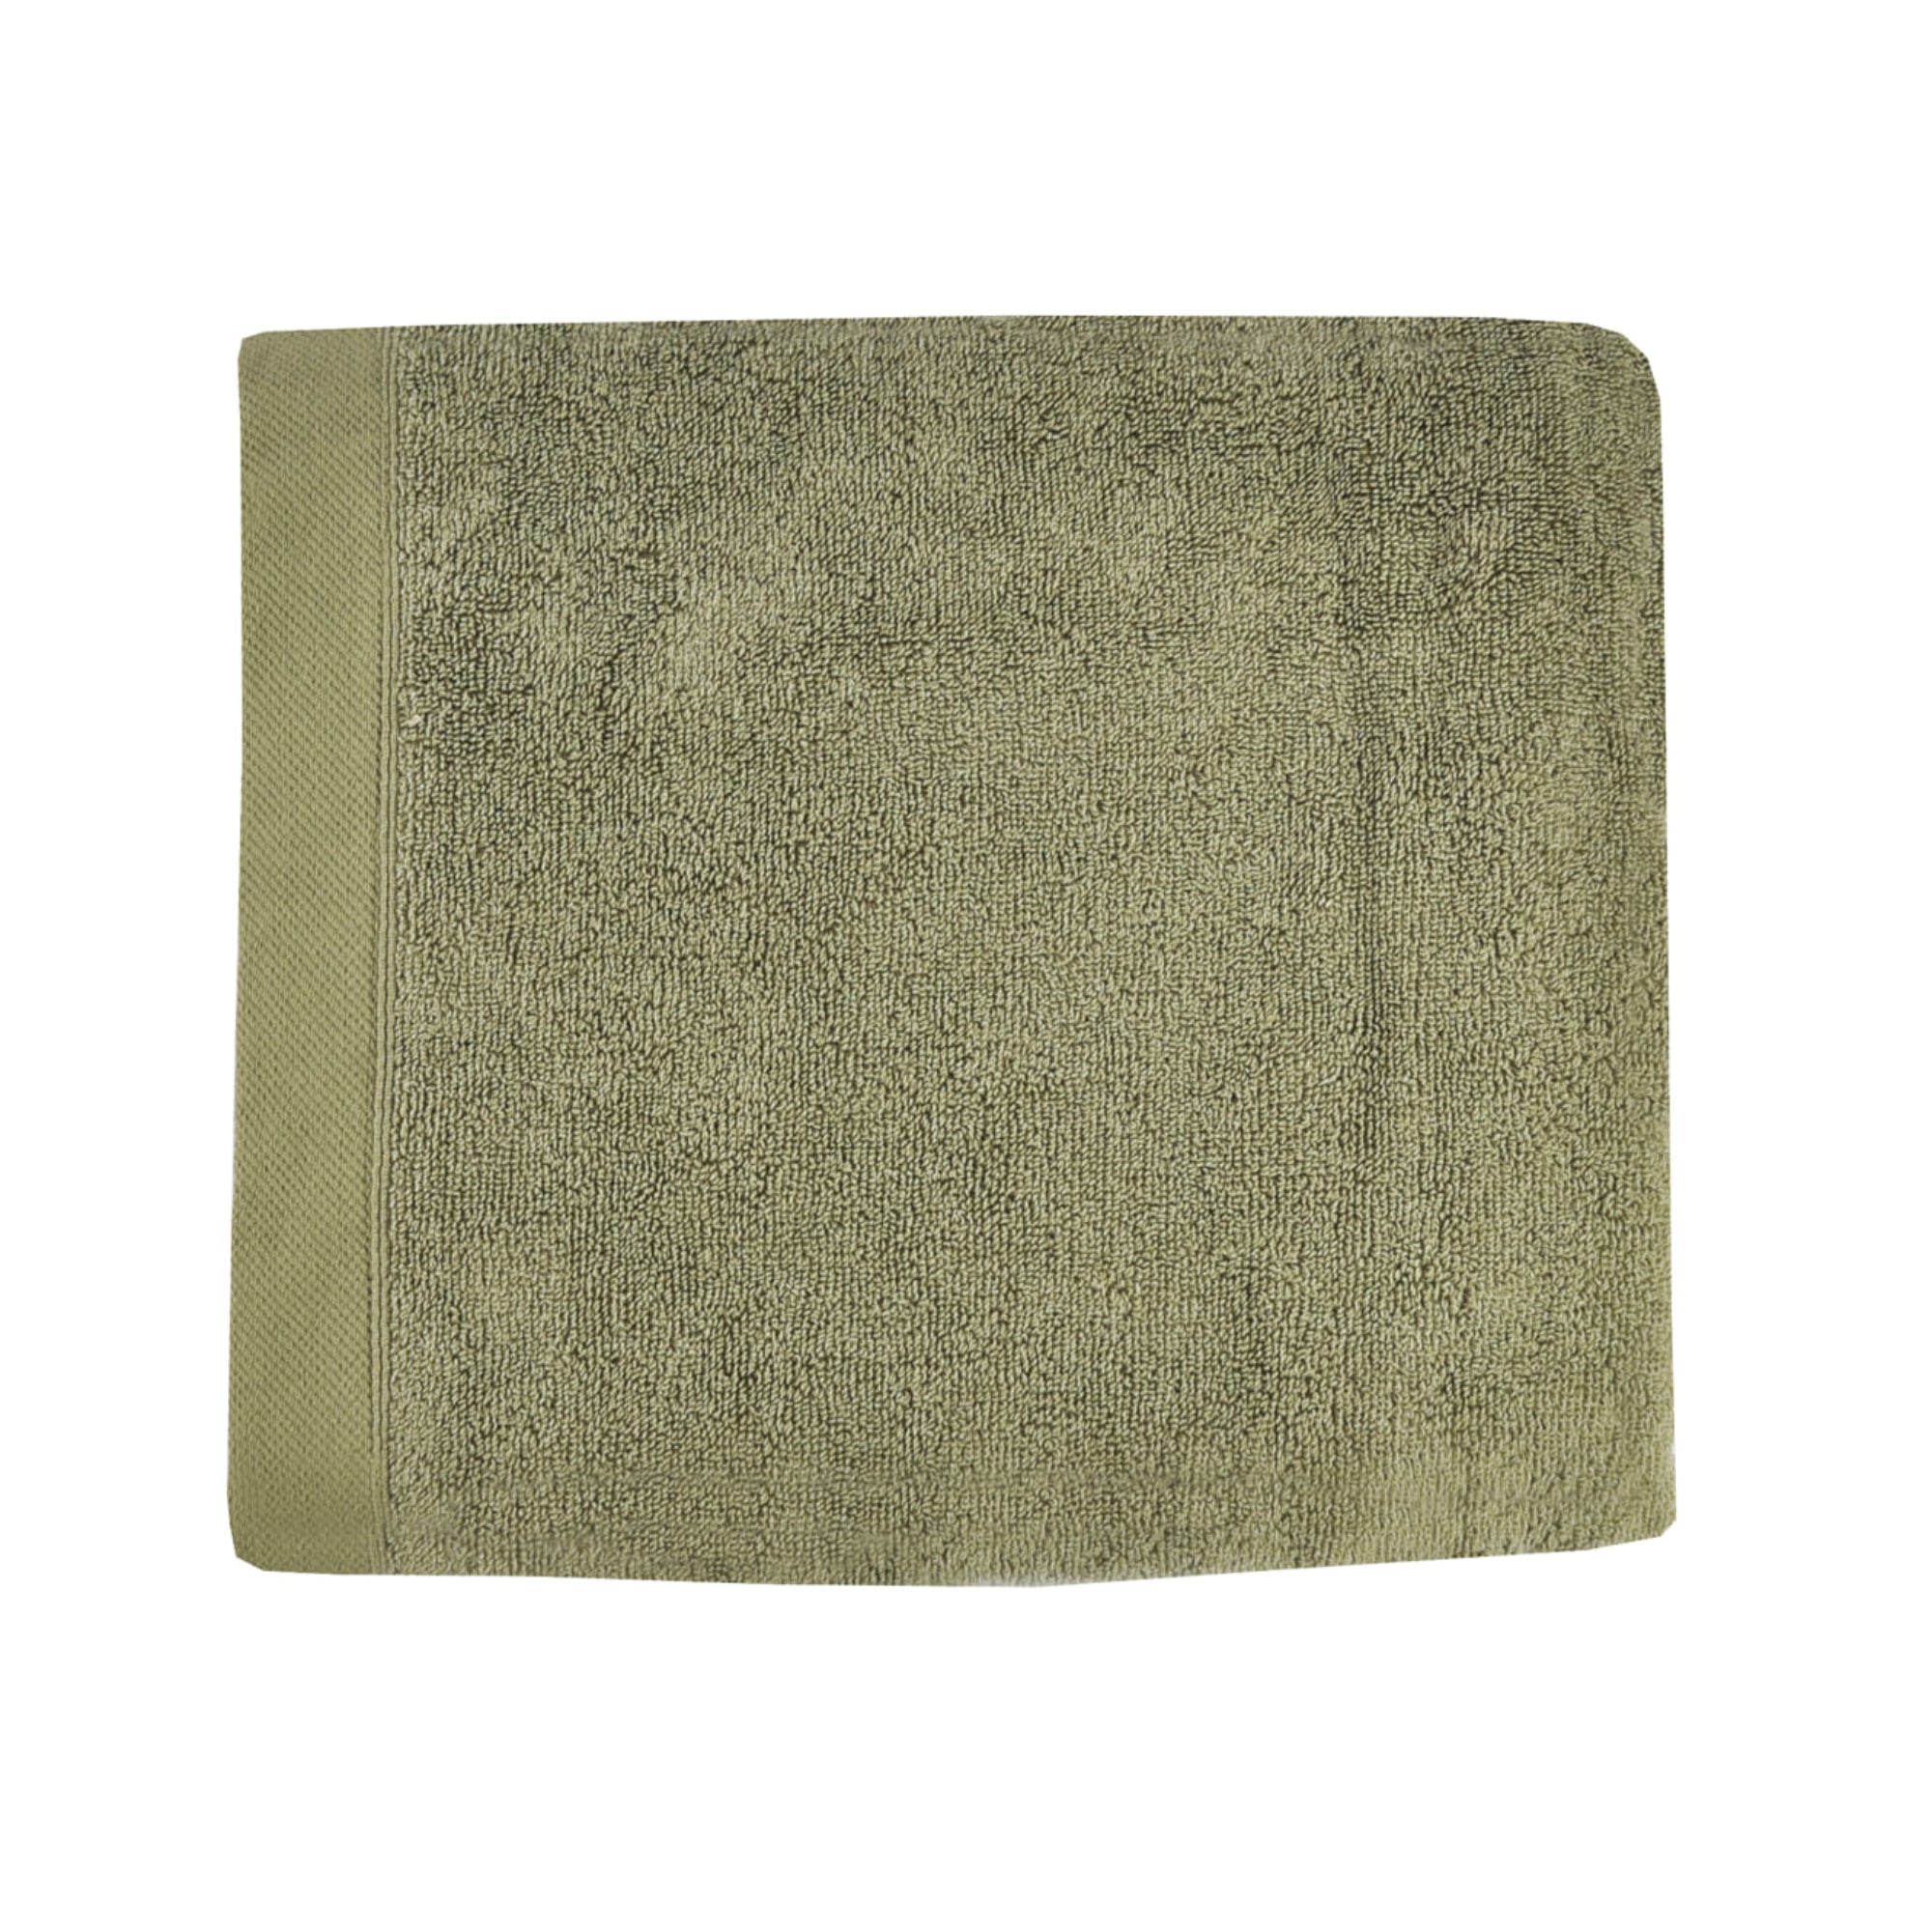 Face Cloth (3 pack) Abode Eco by Drift Home in Khaki